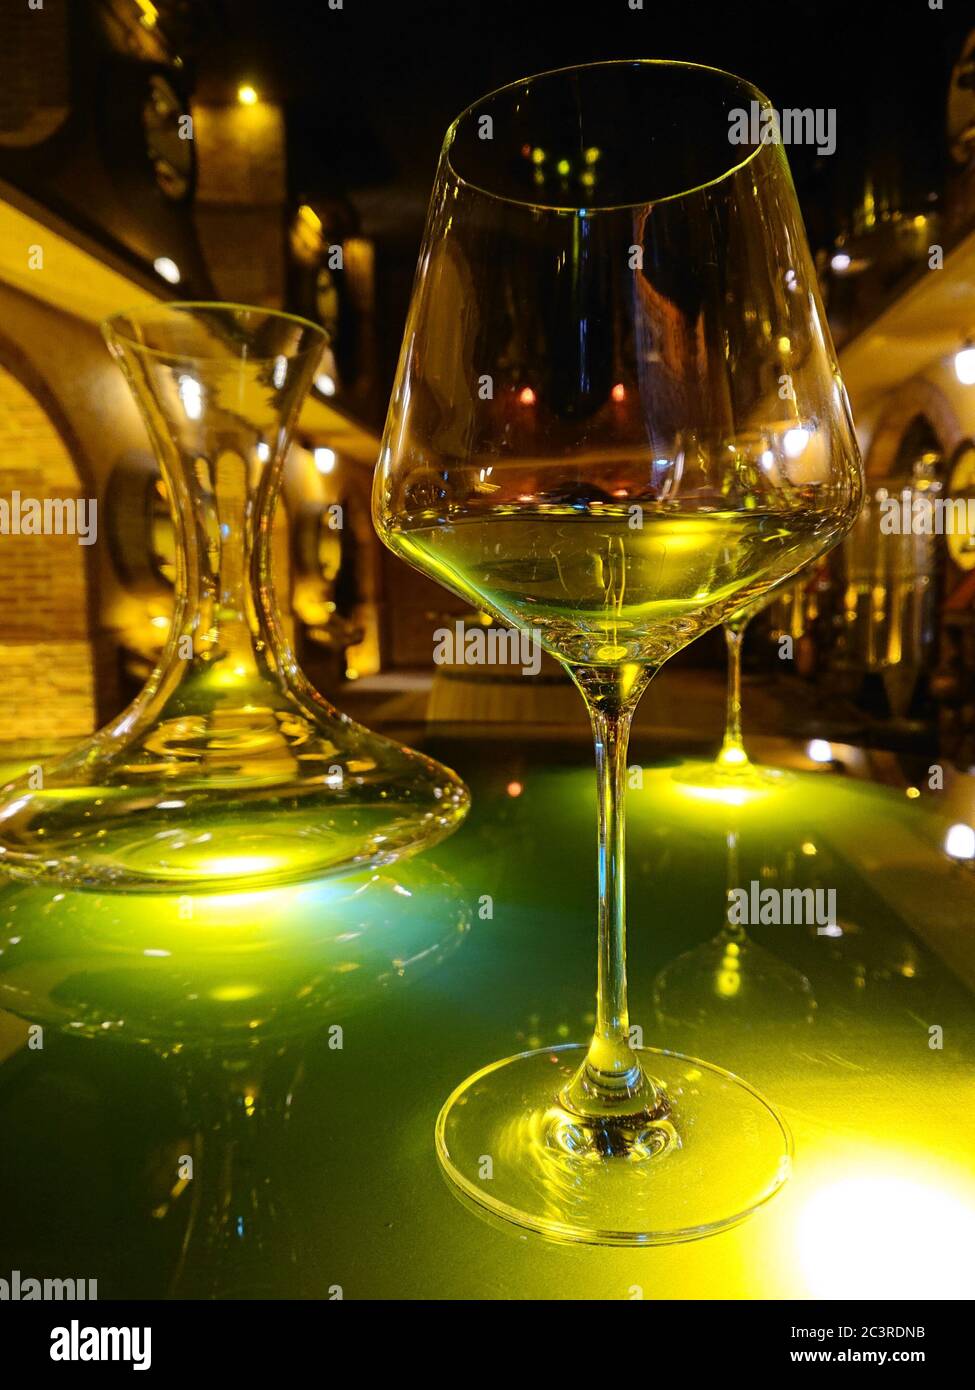 Diffused lights and ornaments form the background for a close-up of a glass of white wine Stock Photo